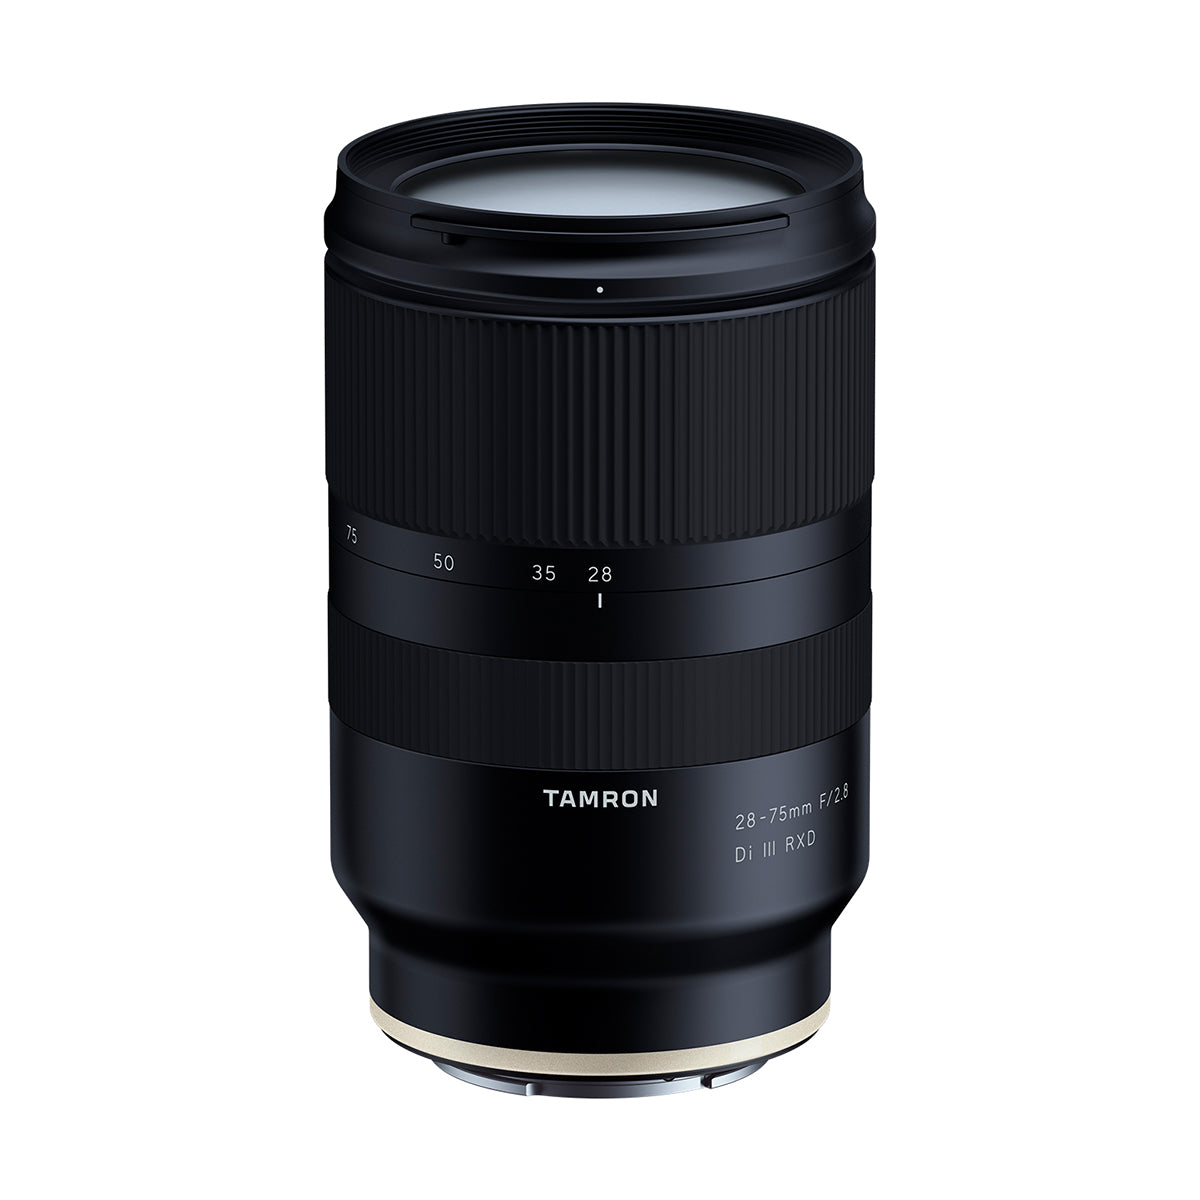 Tamron 28-75mm f/2.8 Di III RXD Lens for Sony FE